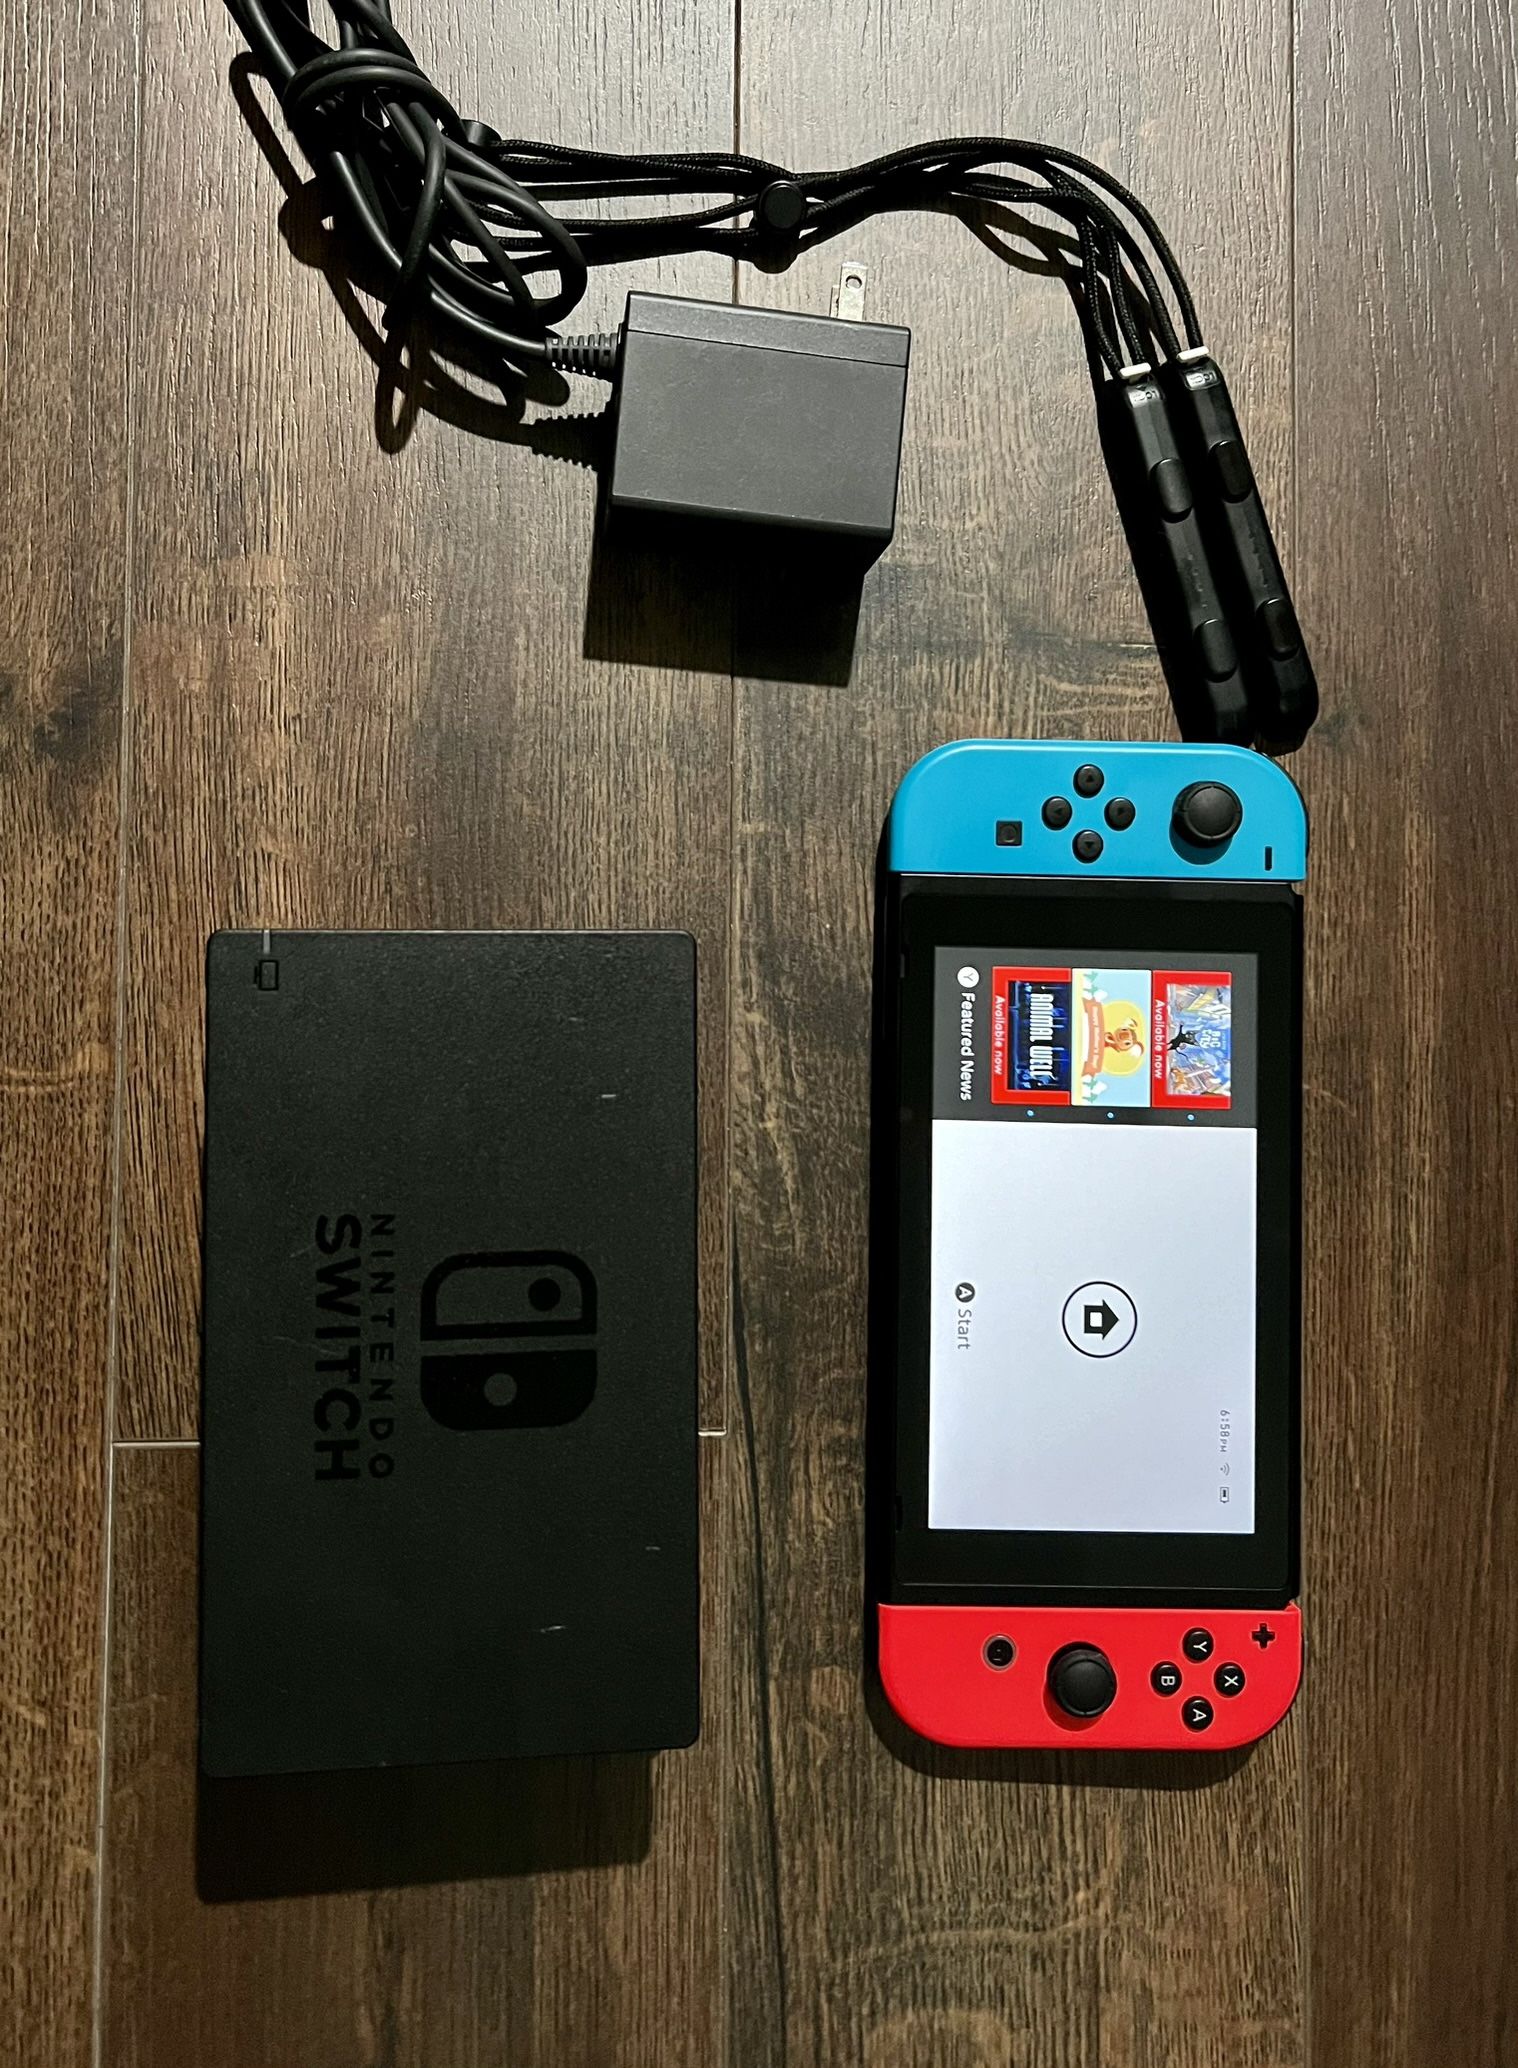 Nintendo Switch V2 With 6 Games